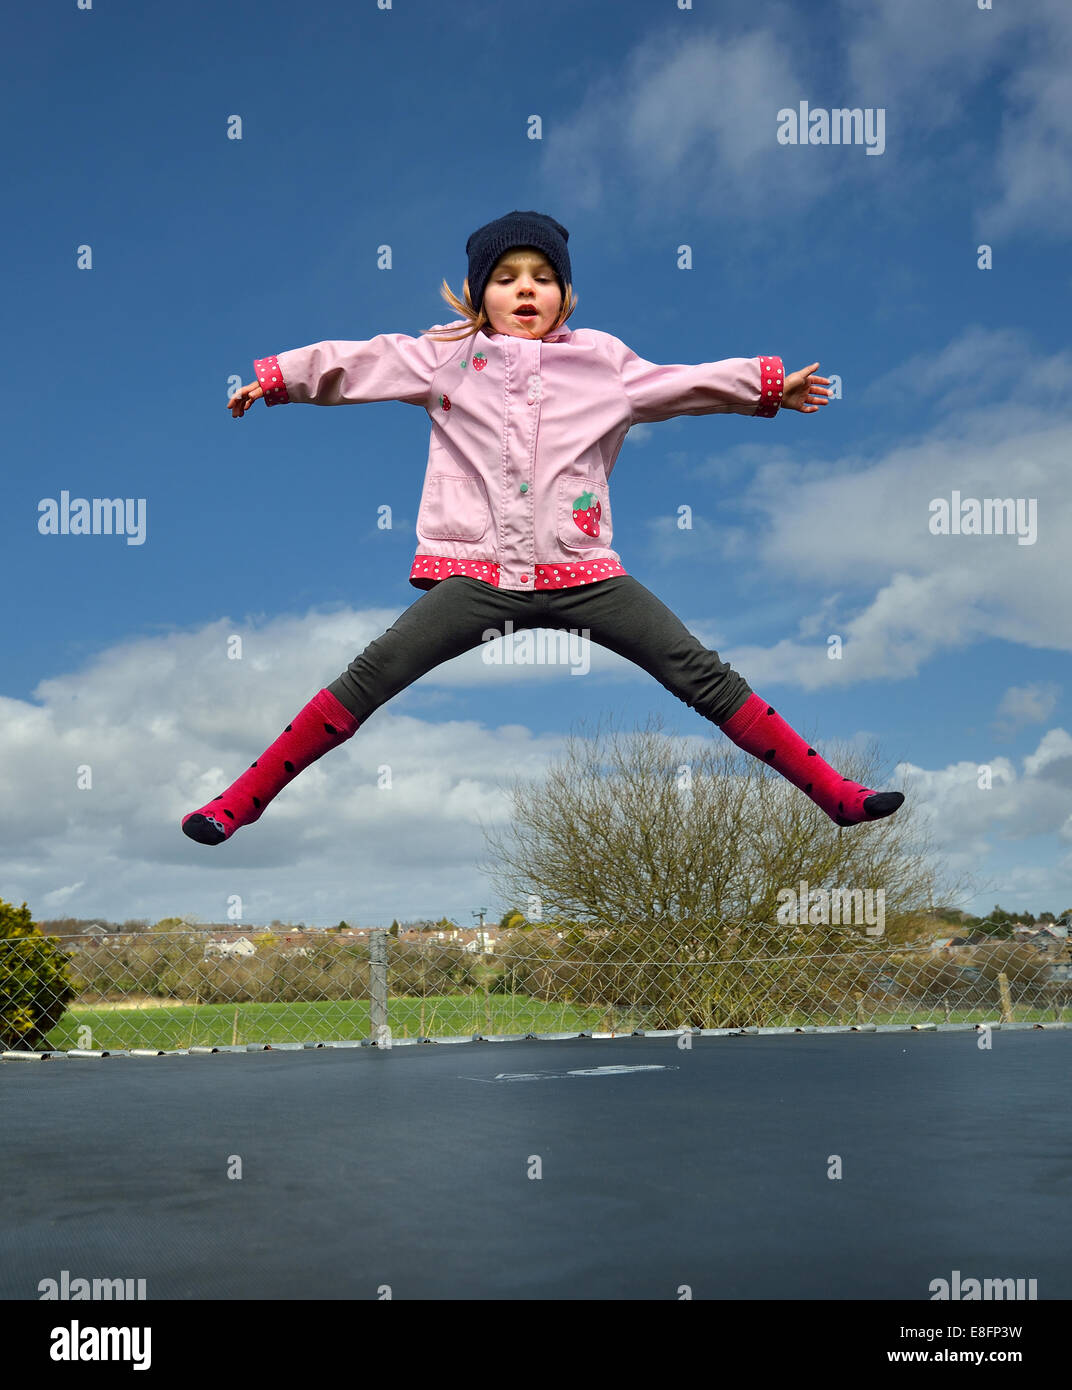 Preschool girl (2-3) jumping on trampoline Banque D'Images